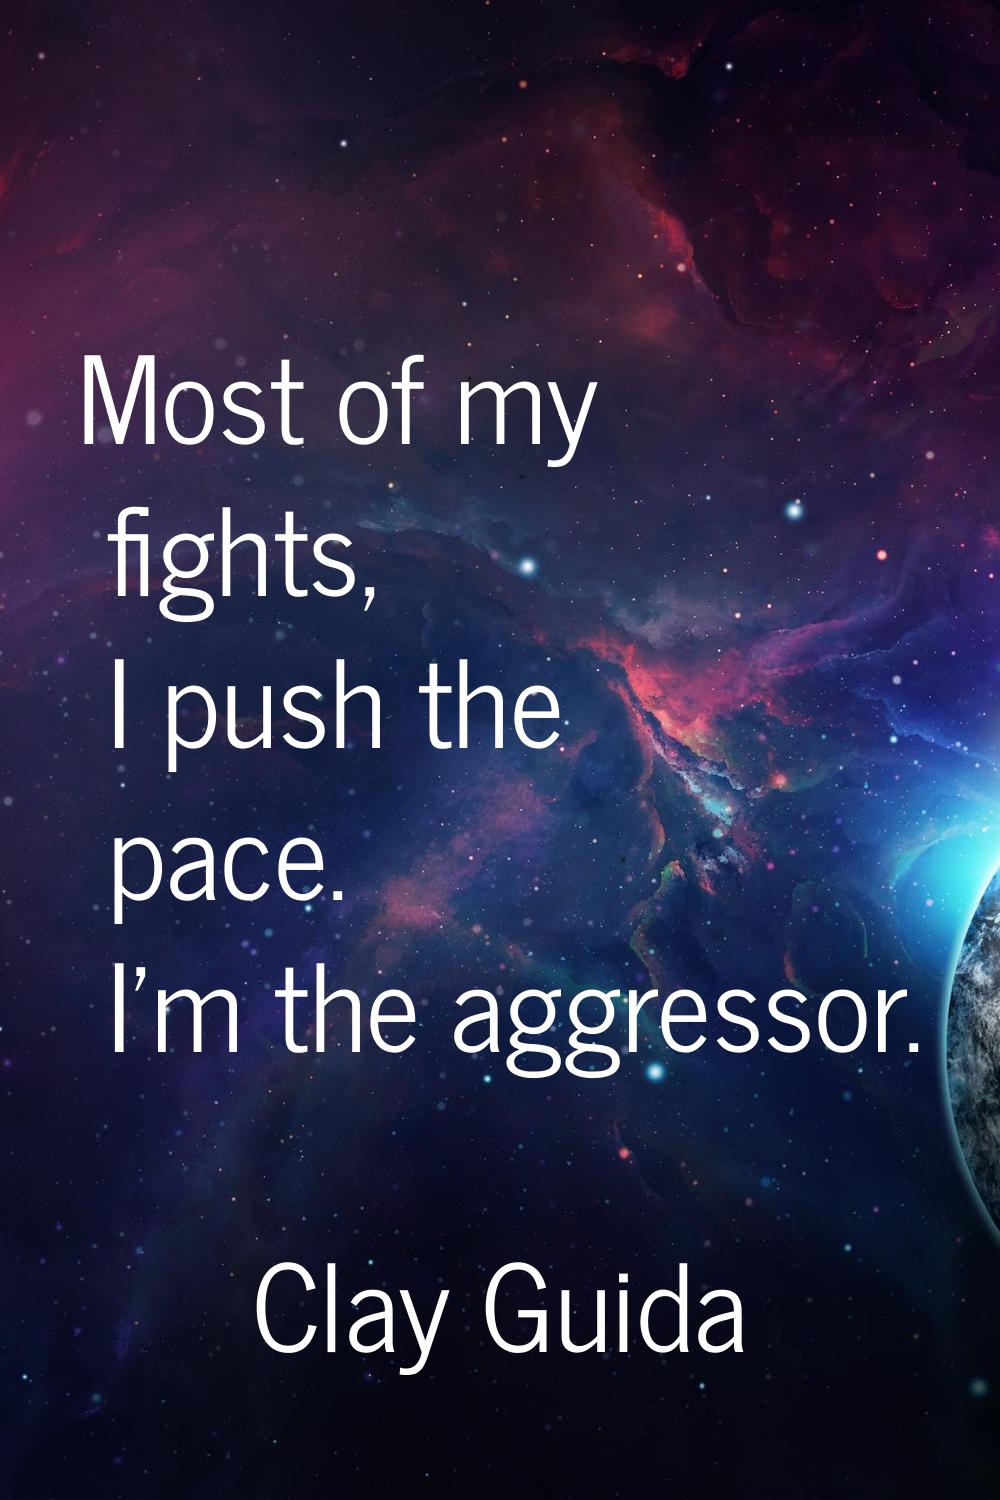 Most of my fights, I push the pace. I'm the aggressor.